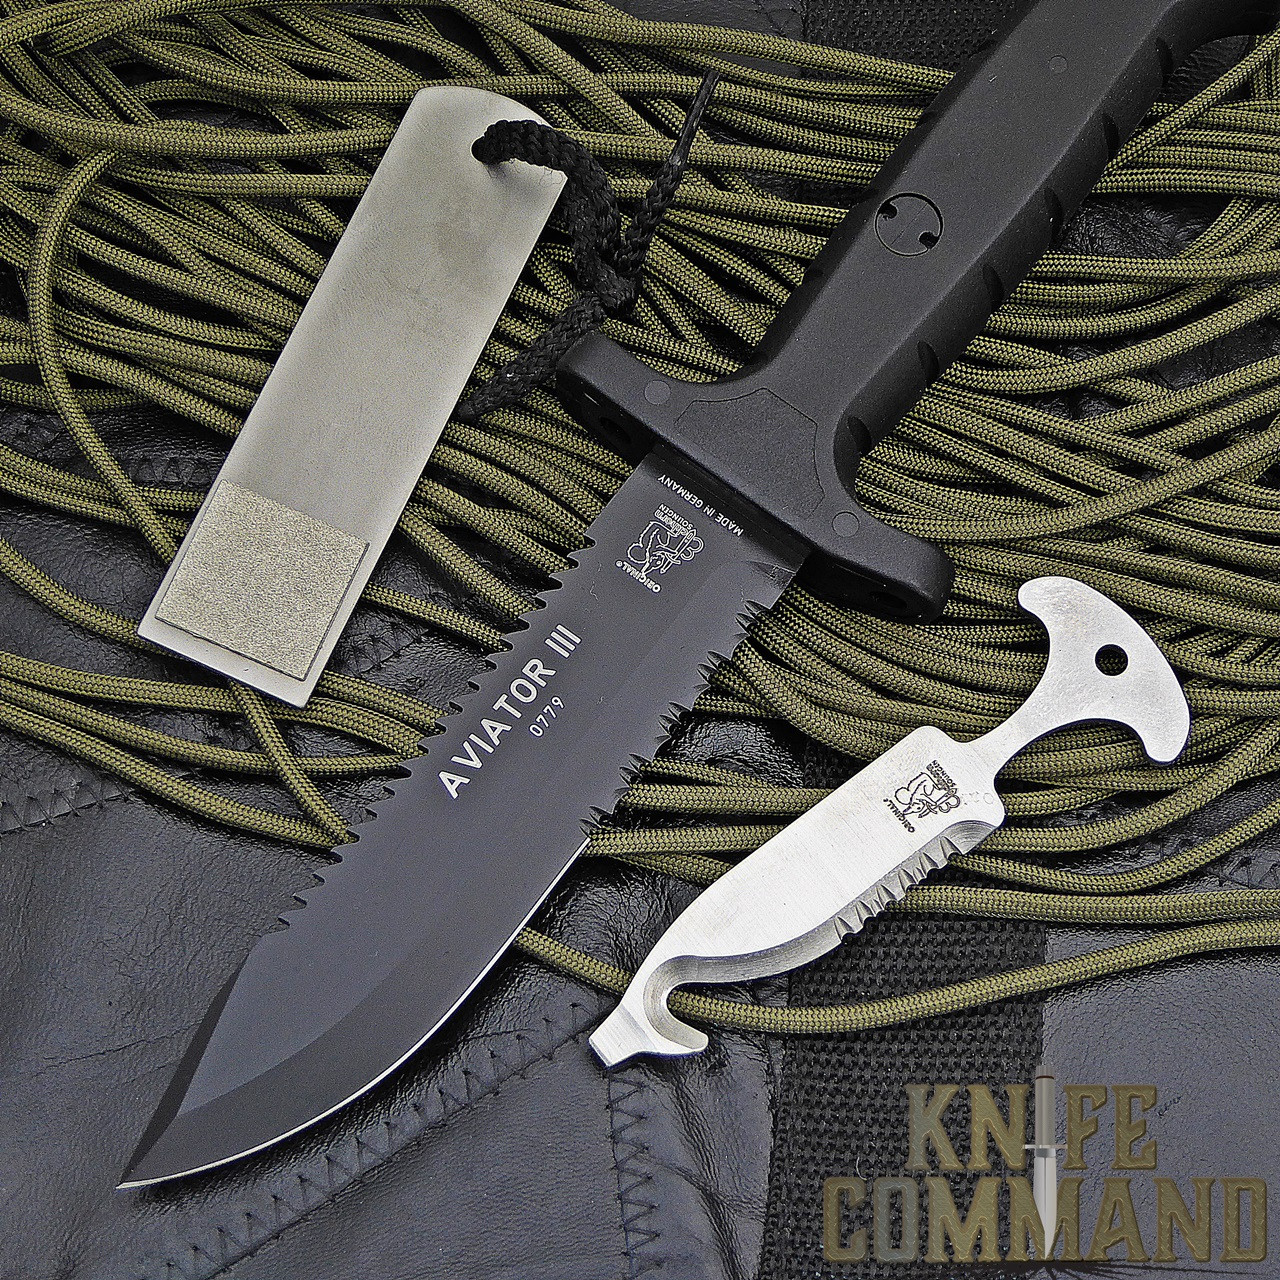 Eickhorn Solingen Aviator III Aircrew Rescue and Survival ASEK Combat Knife.  Sharpener and emergency knife included.